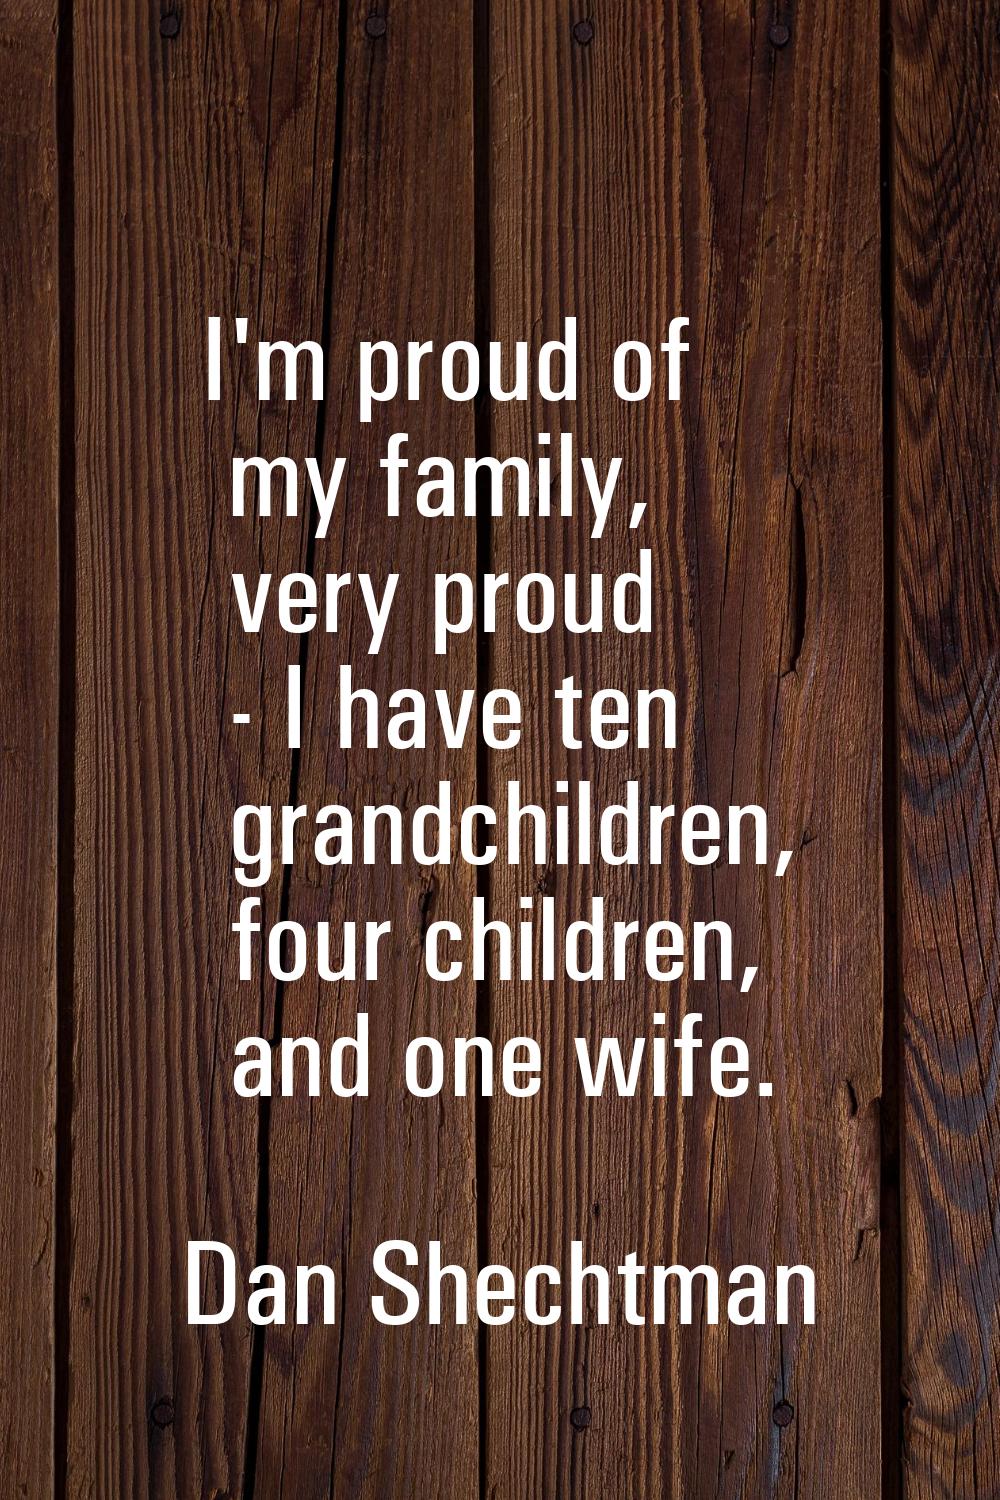 I'm proud of my family, very proud - I have ten grandchildren, four children, and one wife.